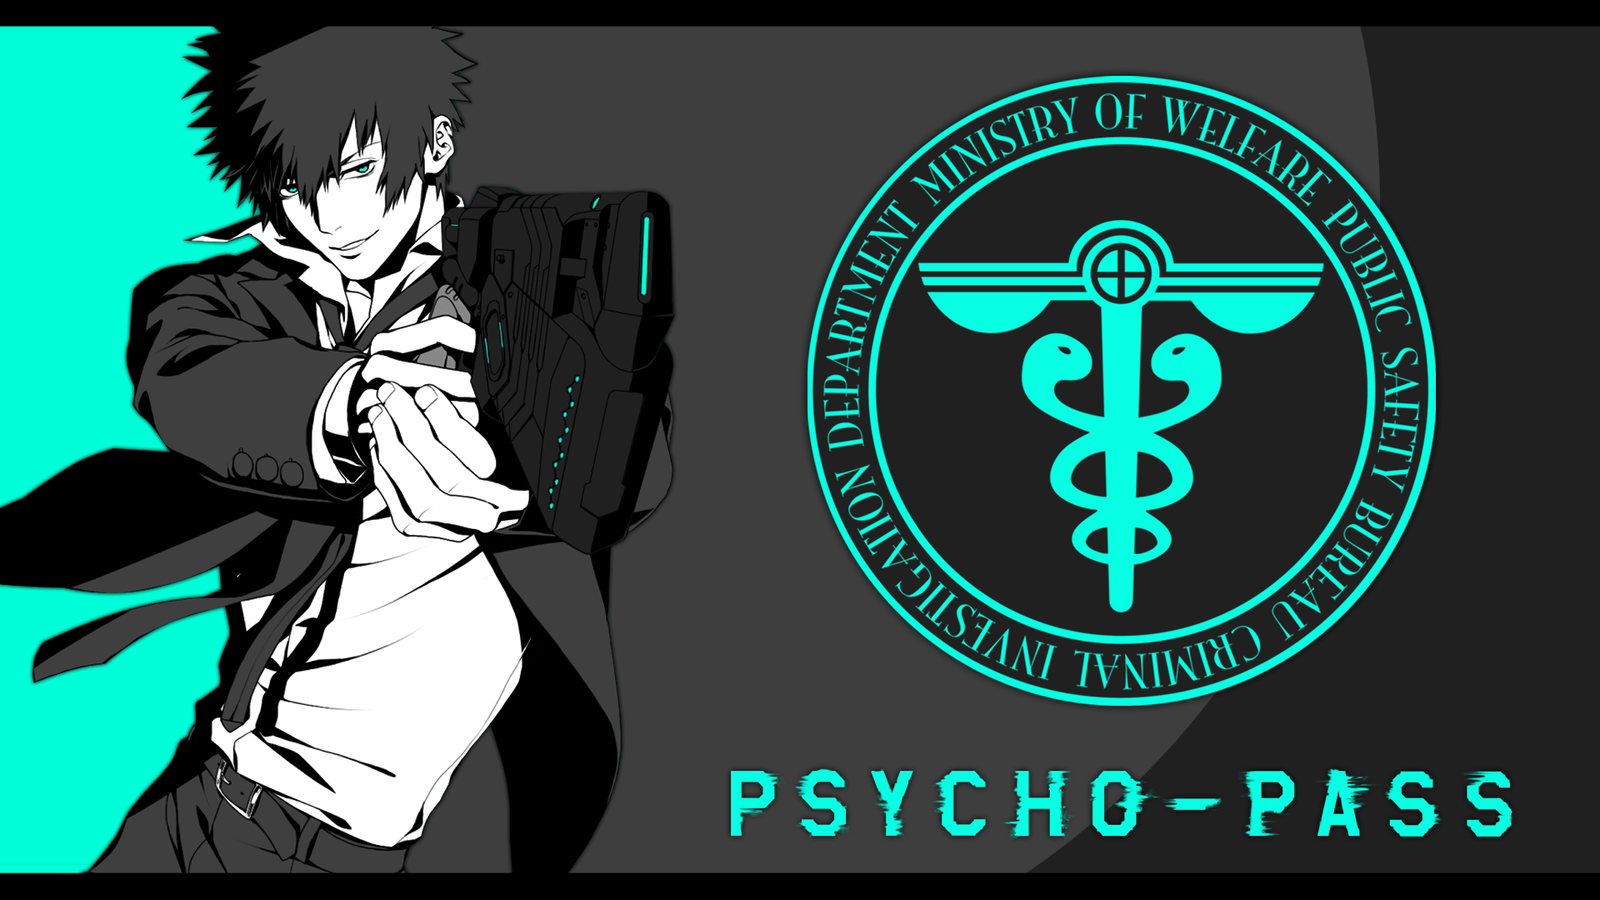 Psycho Pass Wallpapers - Top 25 Psycho Pass Anime Backgrounds